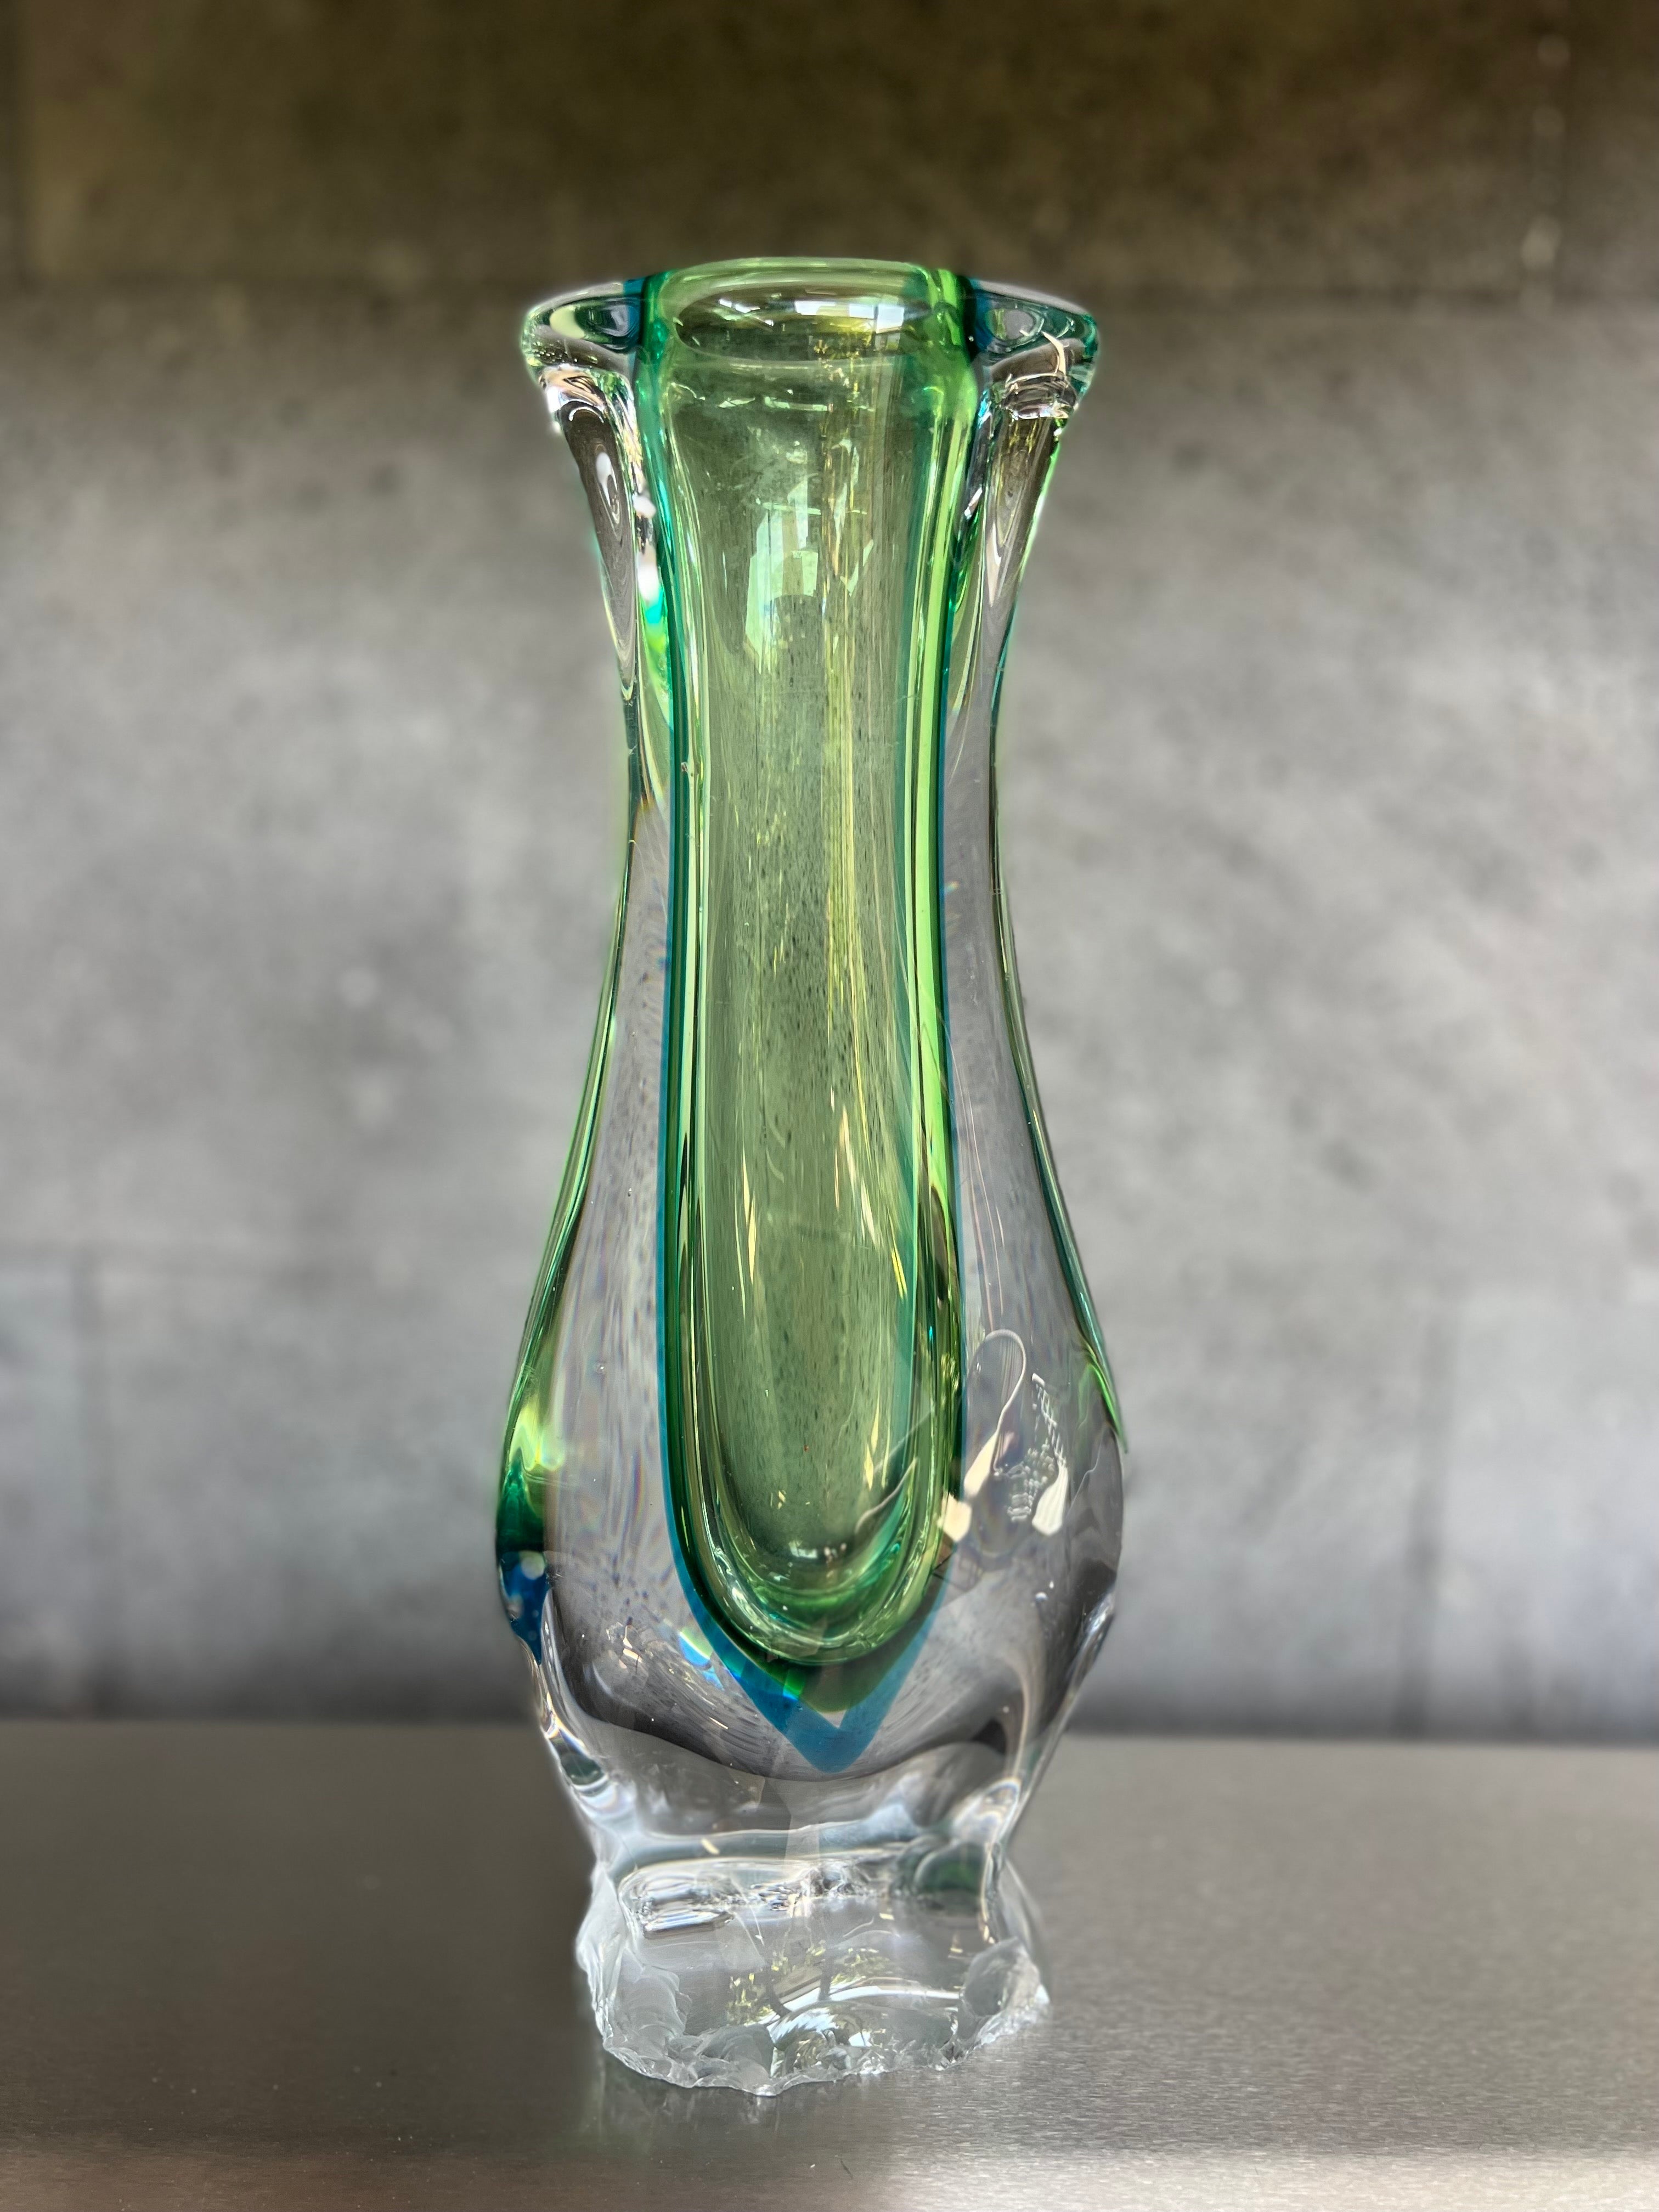 Beautiful piece of glass with two tones of color, excellent for putting a bouquet of flowers